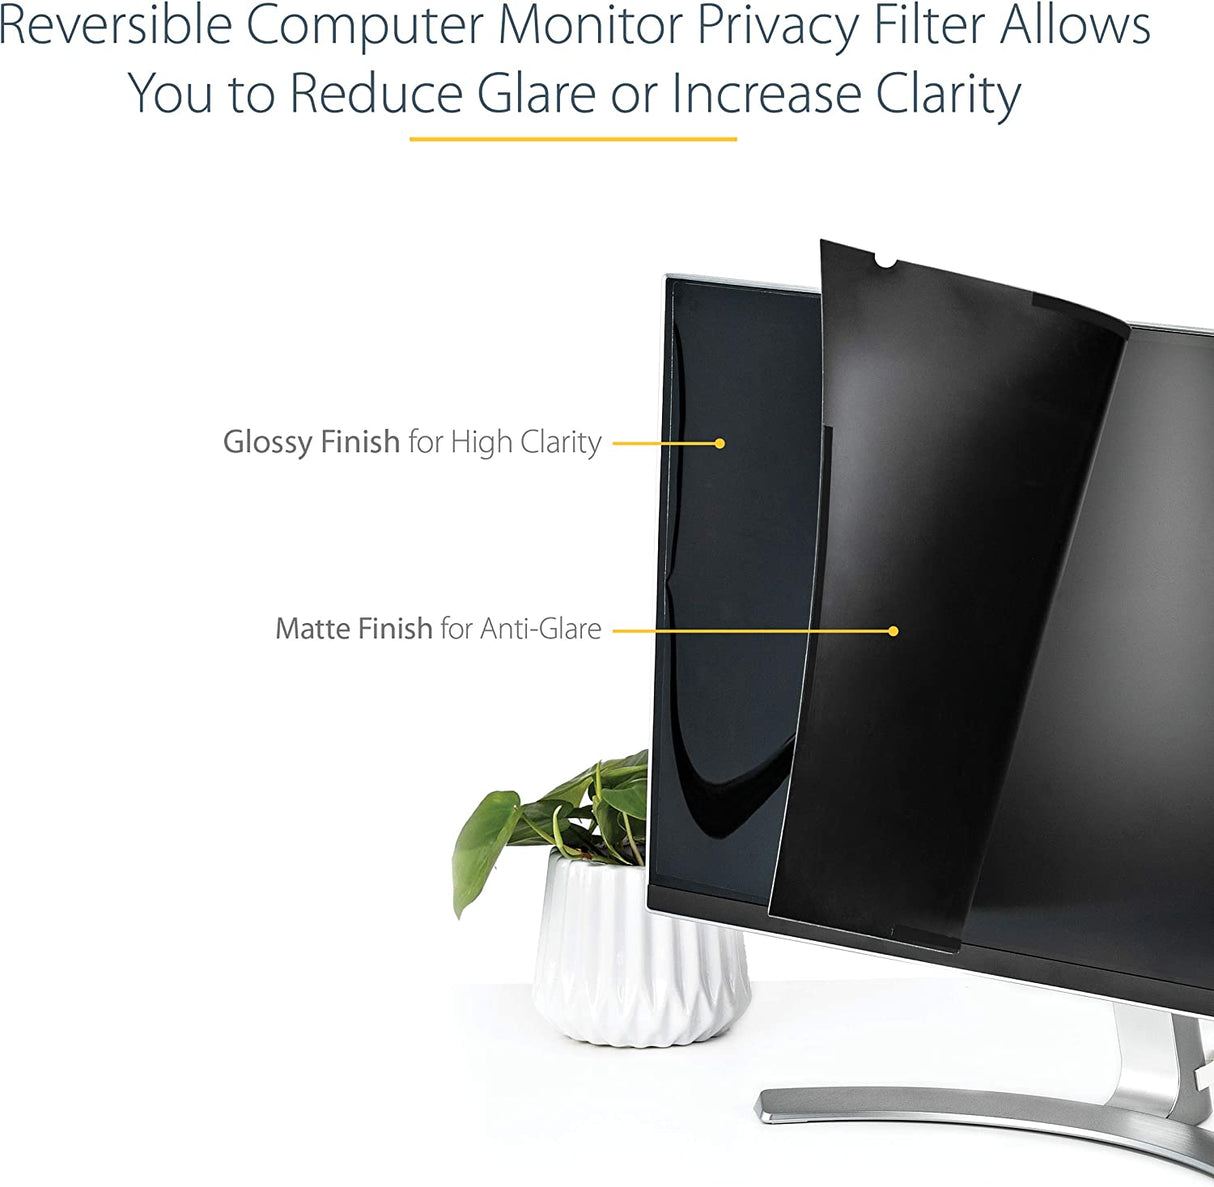 StarTech.com Monitor Privacy Screen for 24 inch PC Display - Computer Screen Security Filter - Blue Light Reducing Screen Protector Film - 16:9 Widescreen - Matte/Glossy - +/-30 Degree (PRIVSCNMON24) 16:9 24"